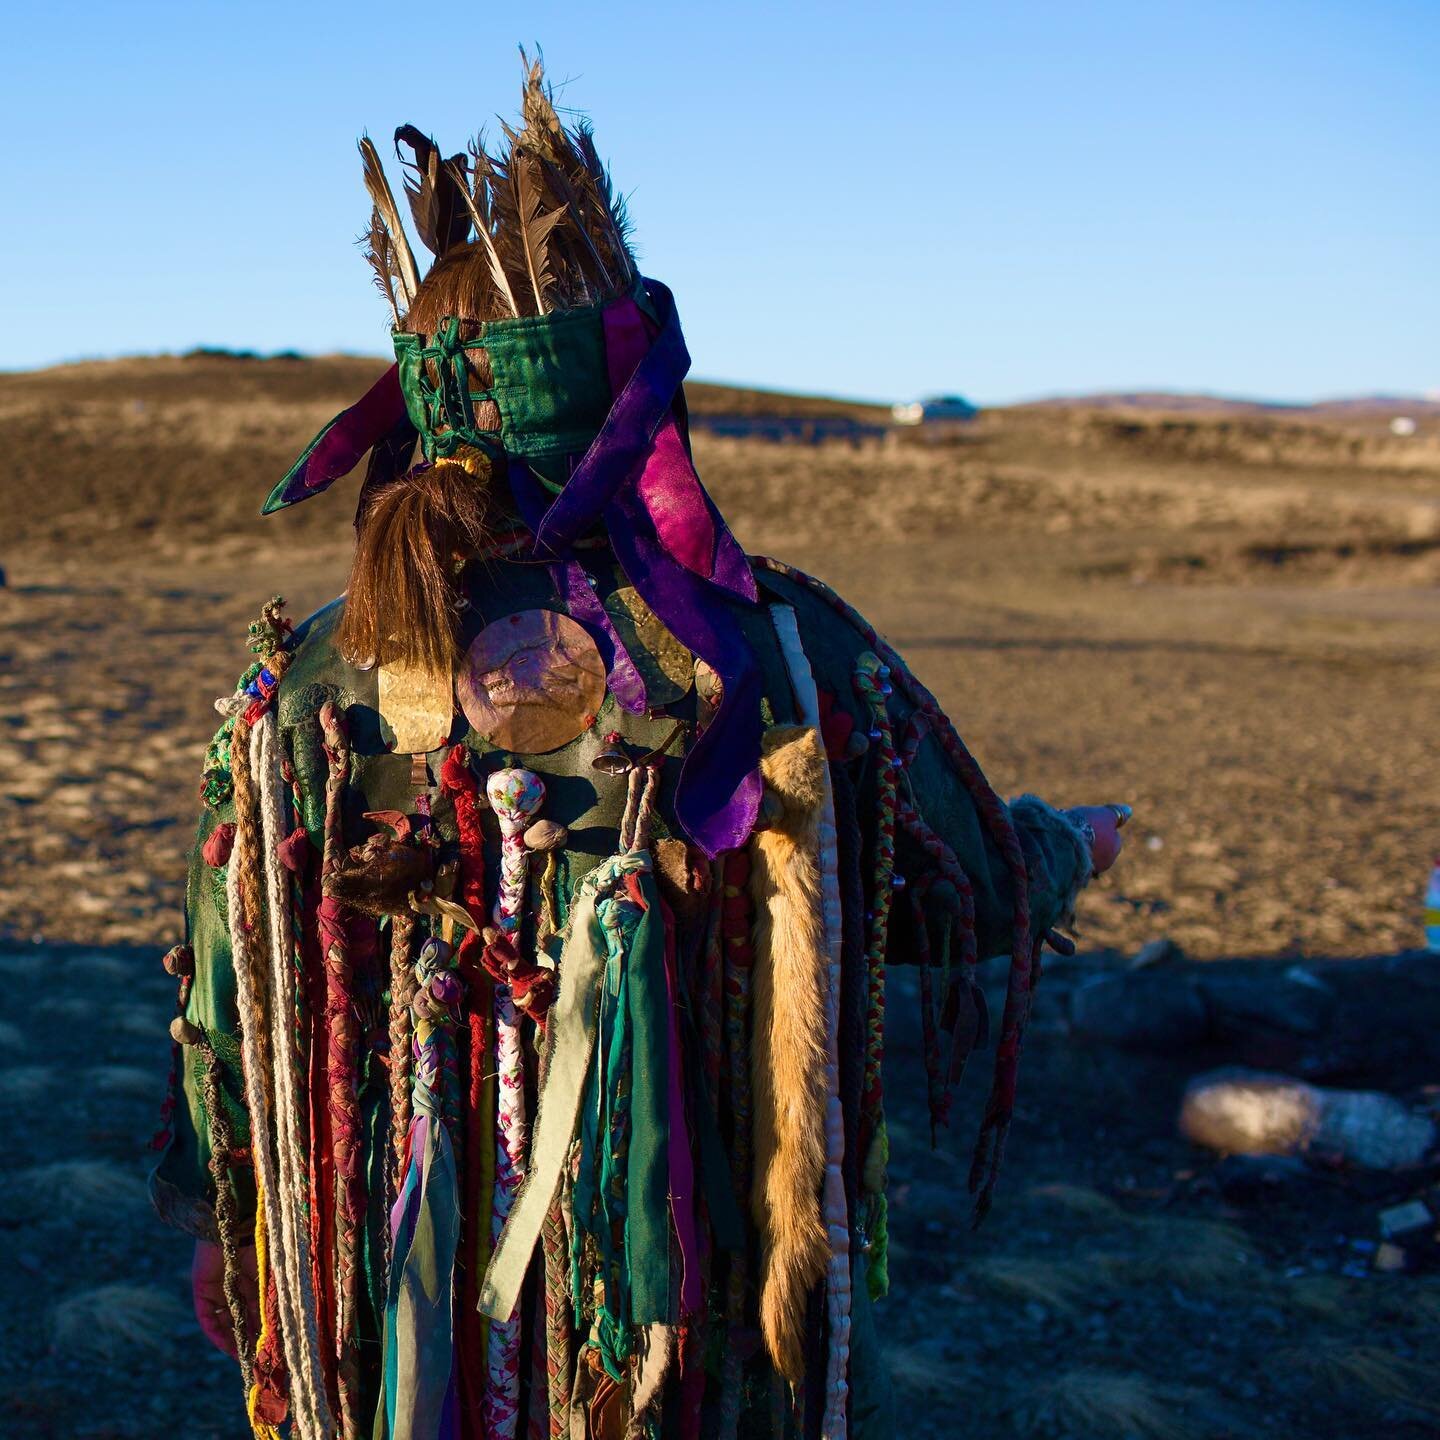 A female shaman in Kyzyl.  Tuvans are traditionally a shamanic nomad culture, which has integrated a form of Buddhism into its shamanic practices.